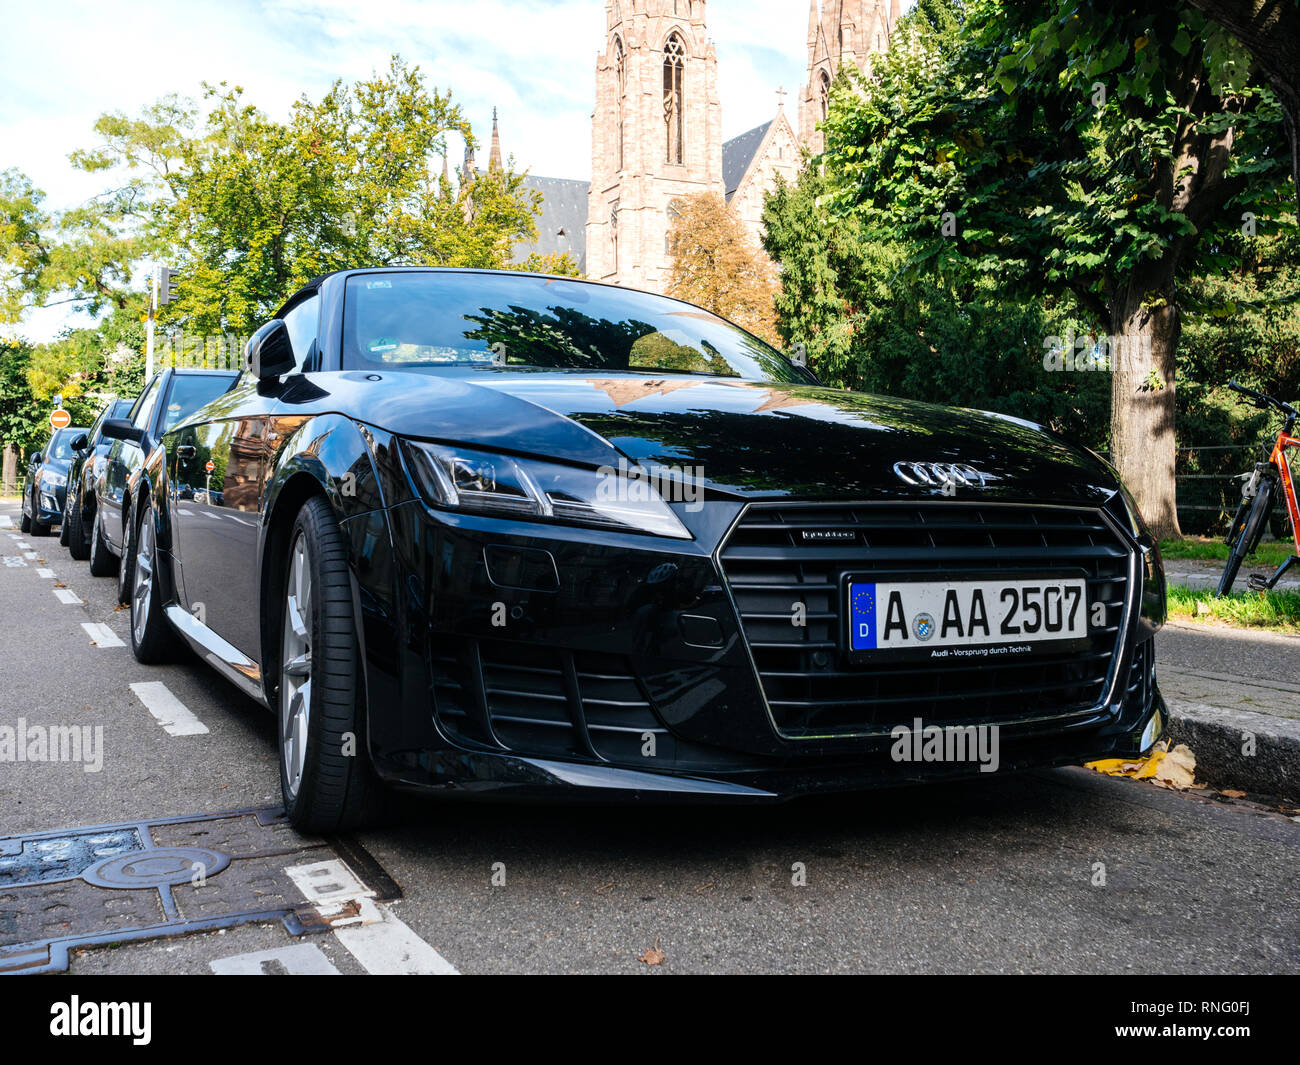 Strasbourg, France - Oct 1, 2017: Front view of luxury new black sport Audi TT sport race car parked on a street in Strasbourg Stock Photo